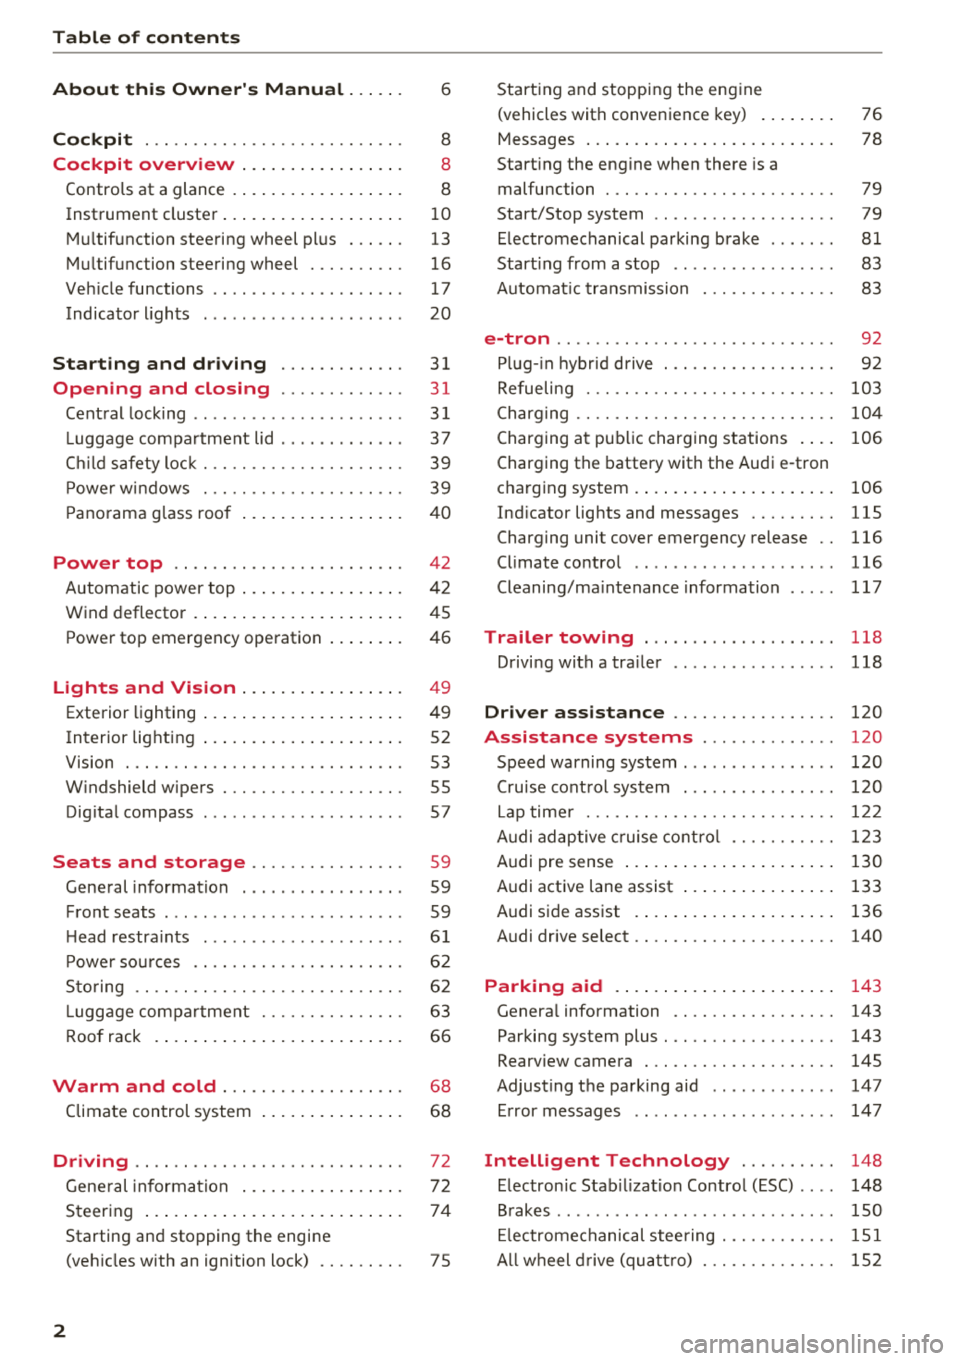 AUDI S3 SEDAN 2018  Owners Manual Table of  contents 
About  this  Owners  Manual.  . .  . . . 
6 
Cockpit  . . .  . .  . . . . . . . . . . . . . . .  . . . .  . .  . 8 
Cockpit  overview  . .  . . . . .  . . .  . .  . .  . . . 8 
Co